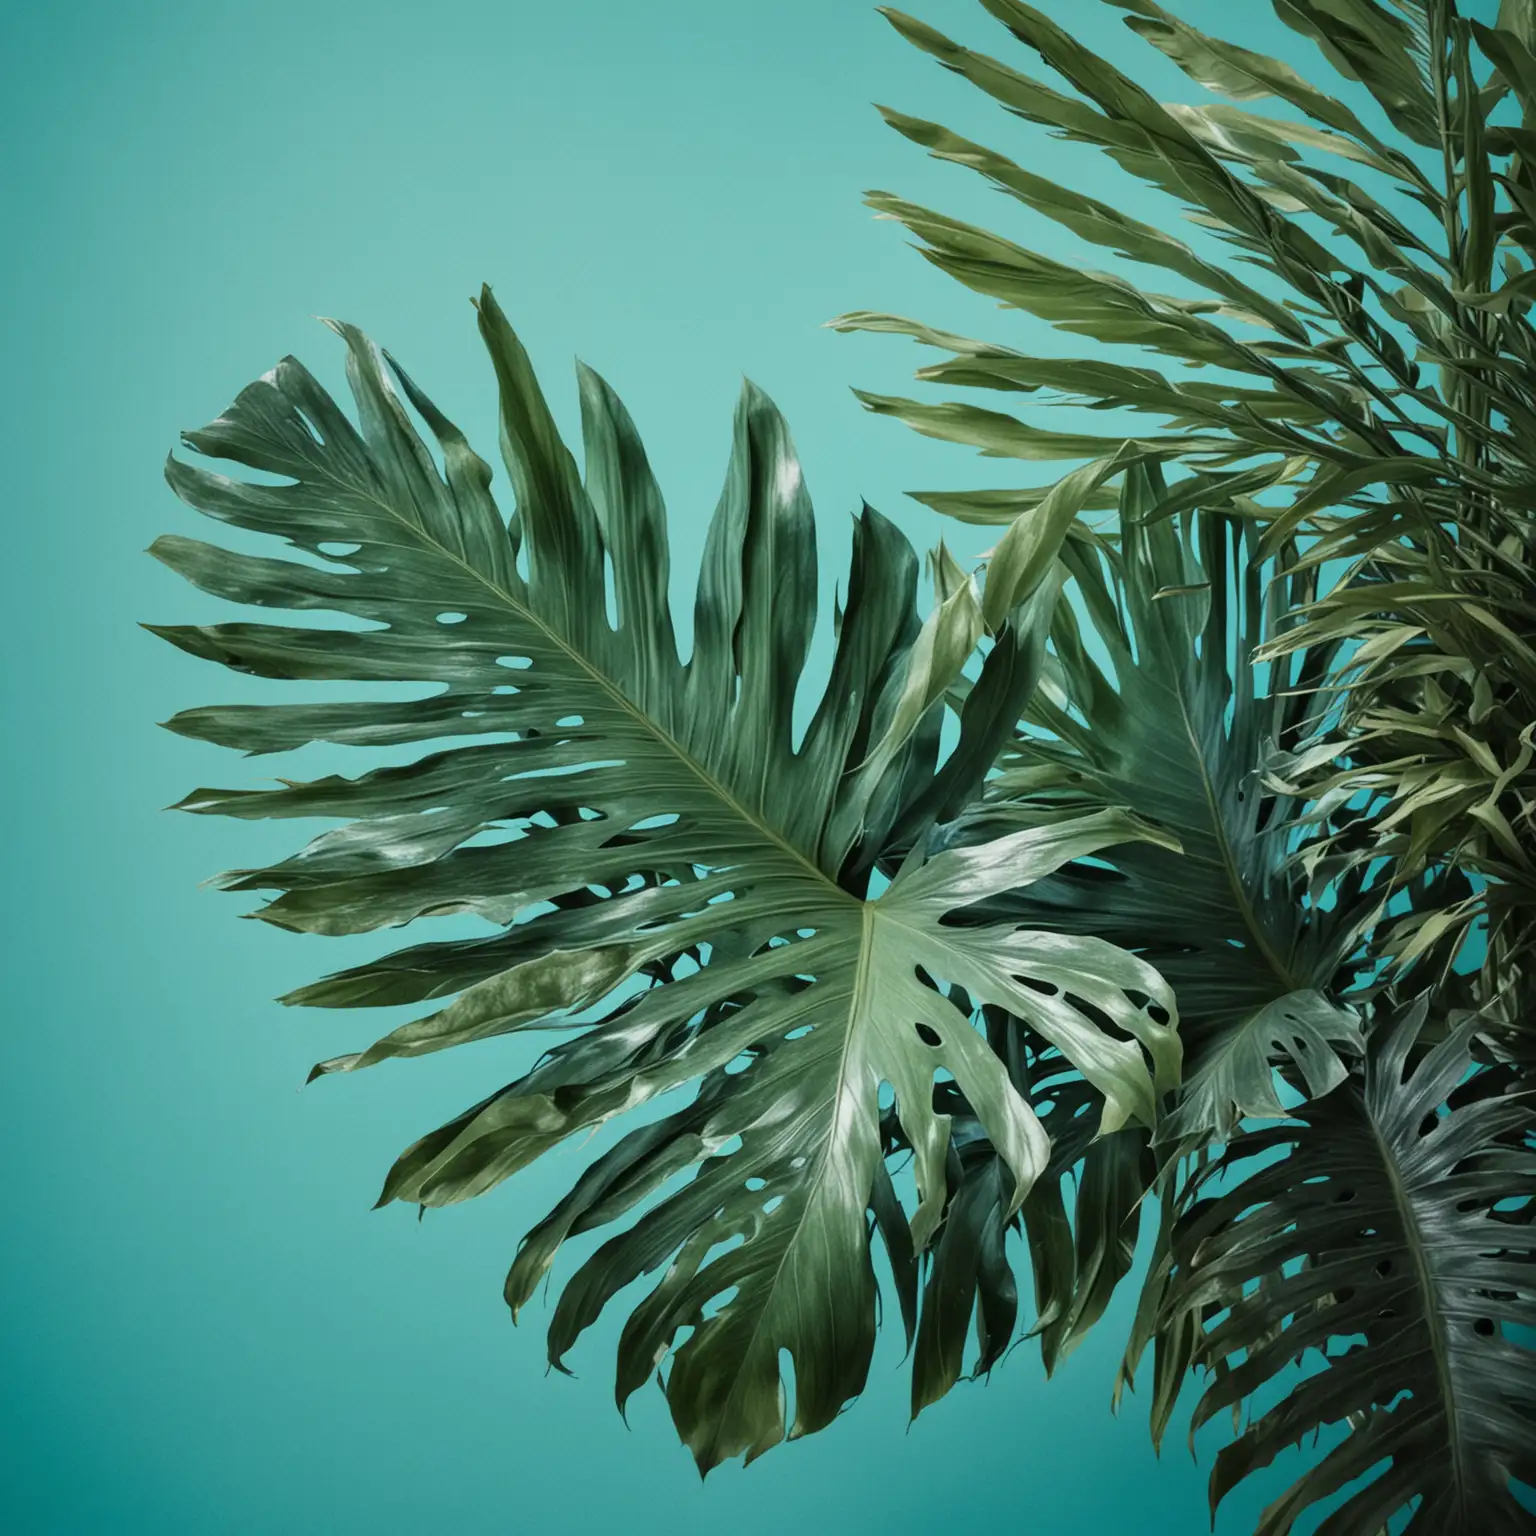 Three Vibrant Tropical Leaves on Turquoise Background